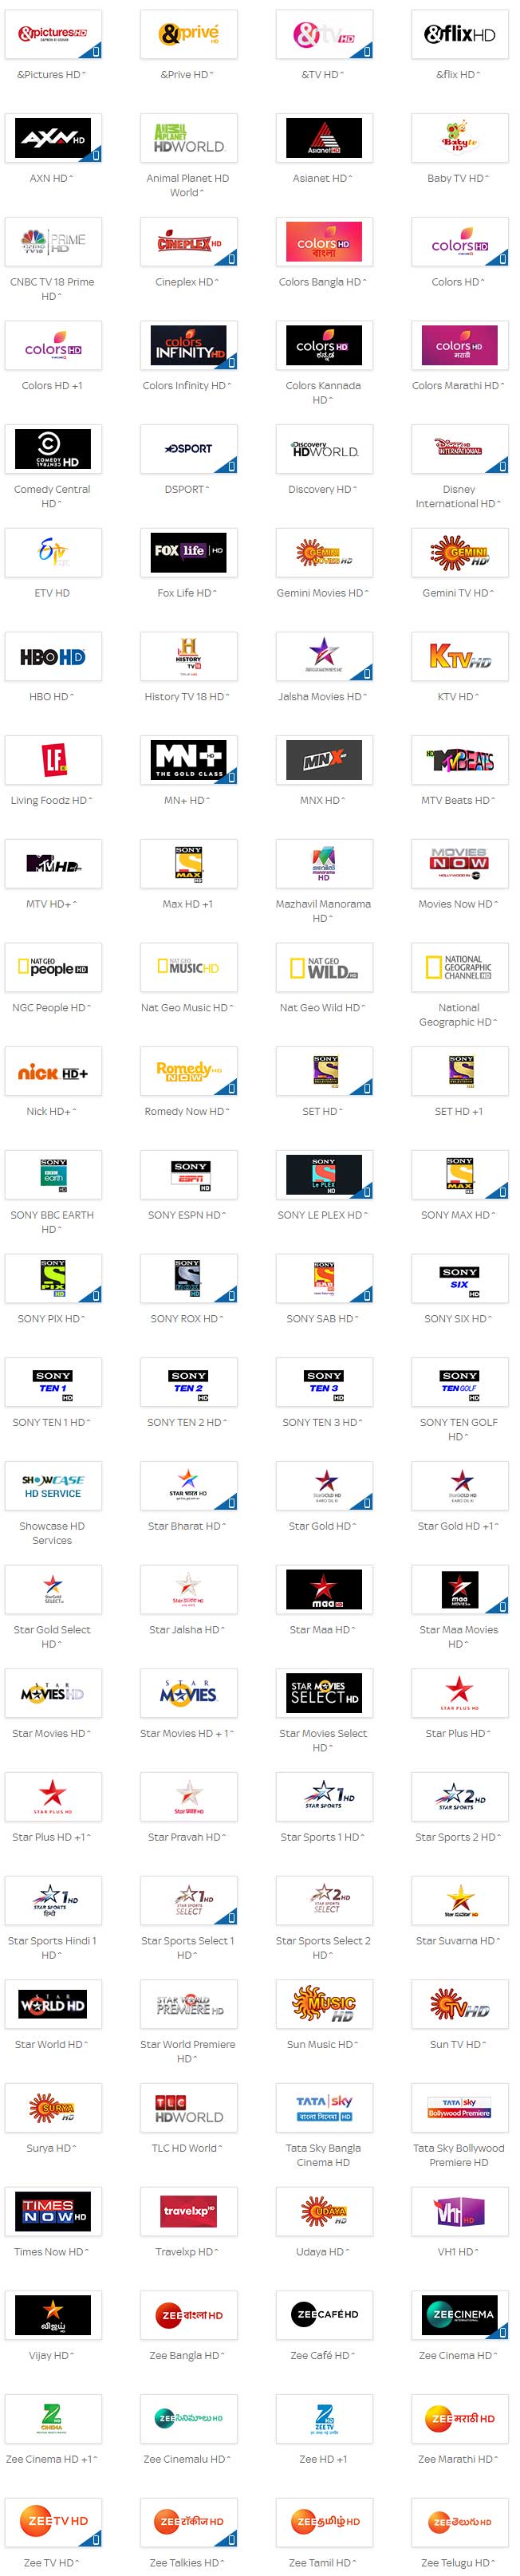 Tatasky Complete Channel list - Tatasky Connection in Pakistan